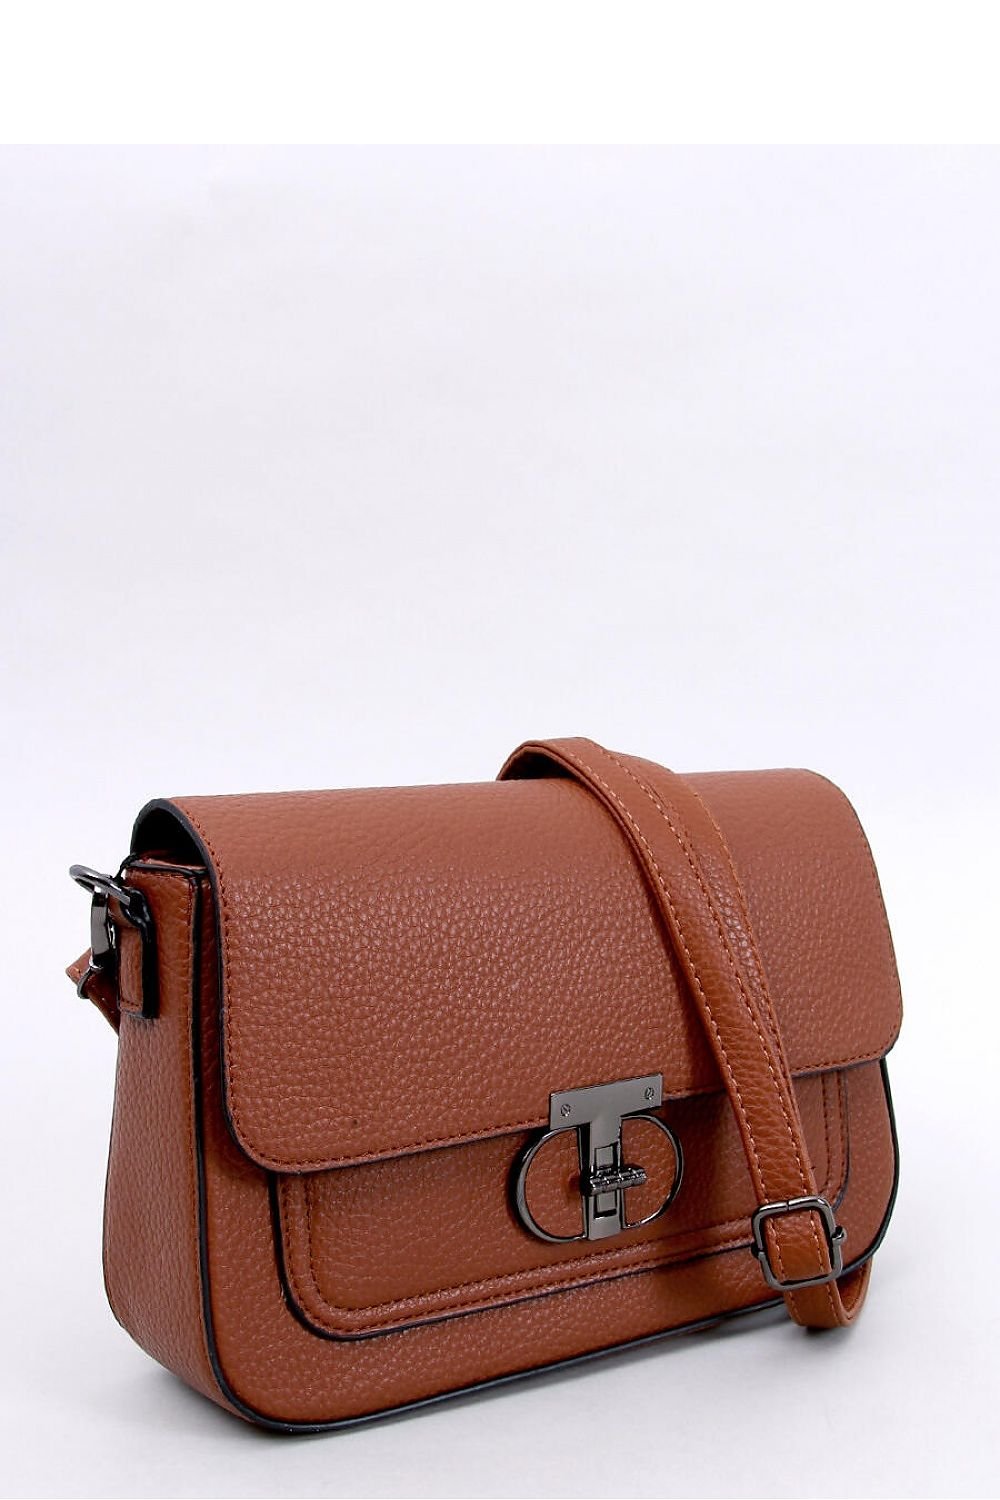 Brown messenger bag stylish clasp with a flap